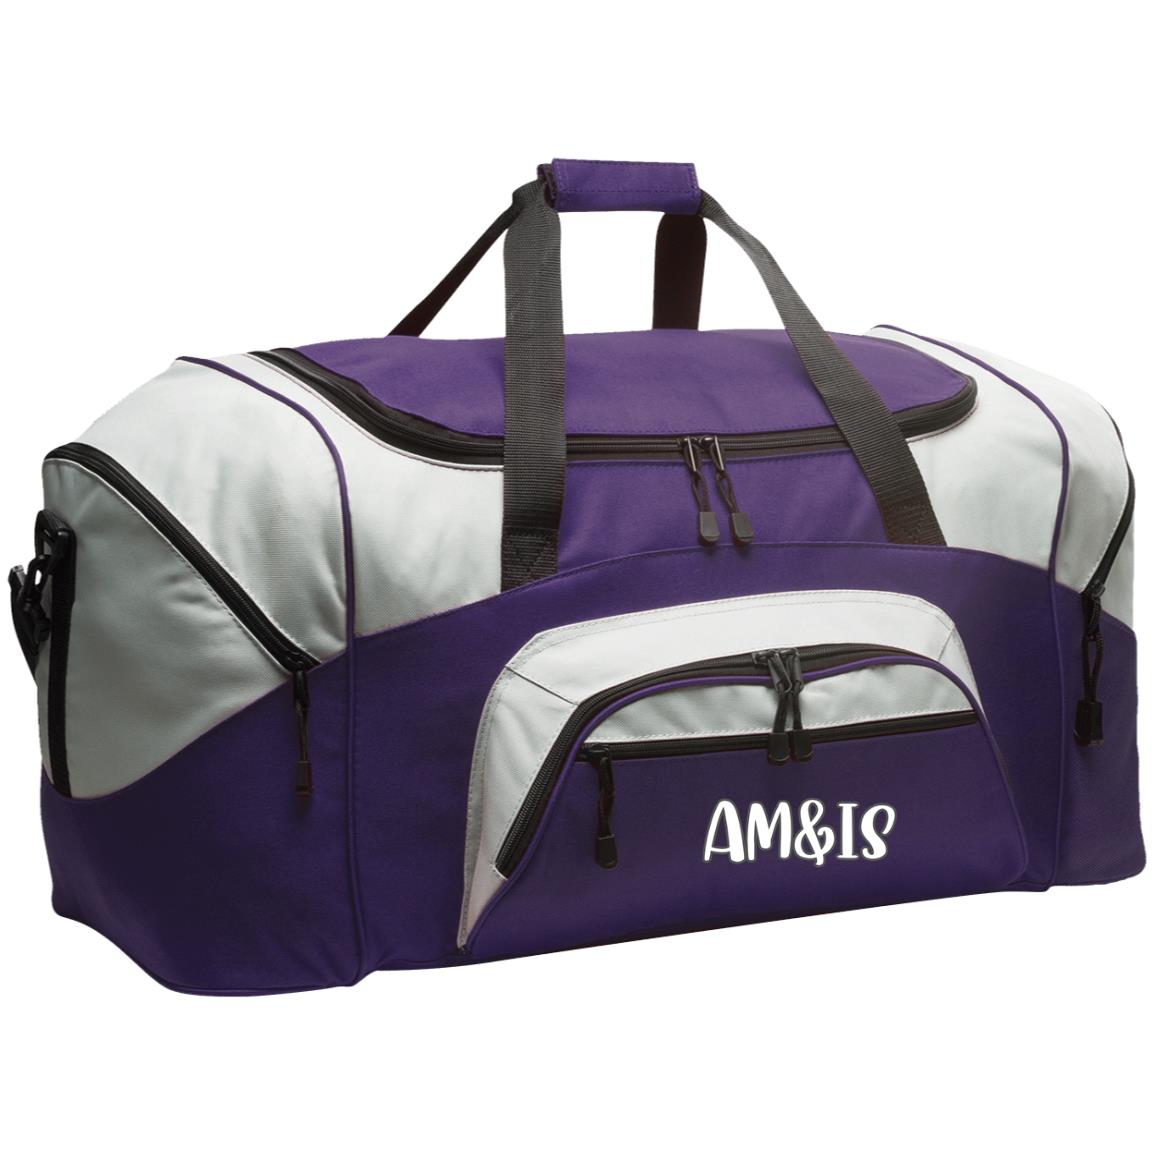 PURPLE/GRAY ONE SIZE - AM&IS Activewear Colorblock Sport Duffel - duffel bag at TFC&H Co.